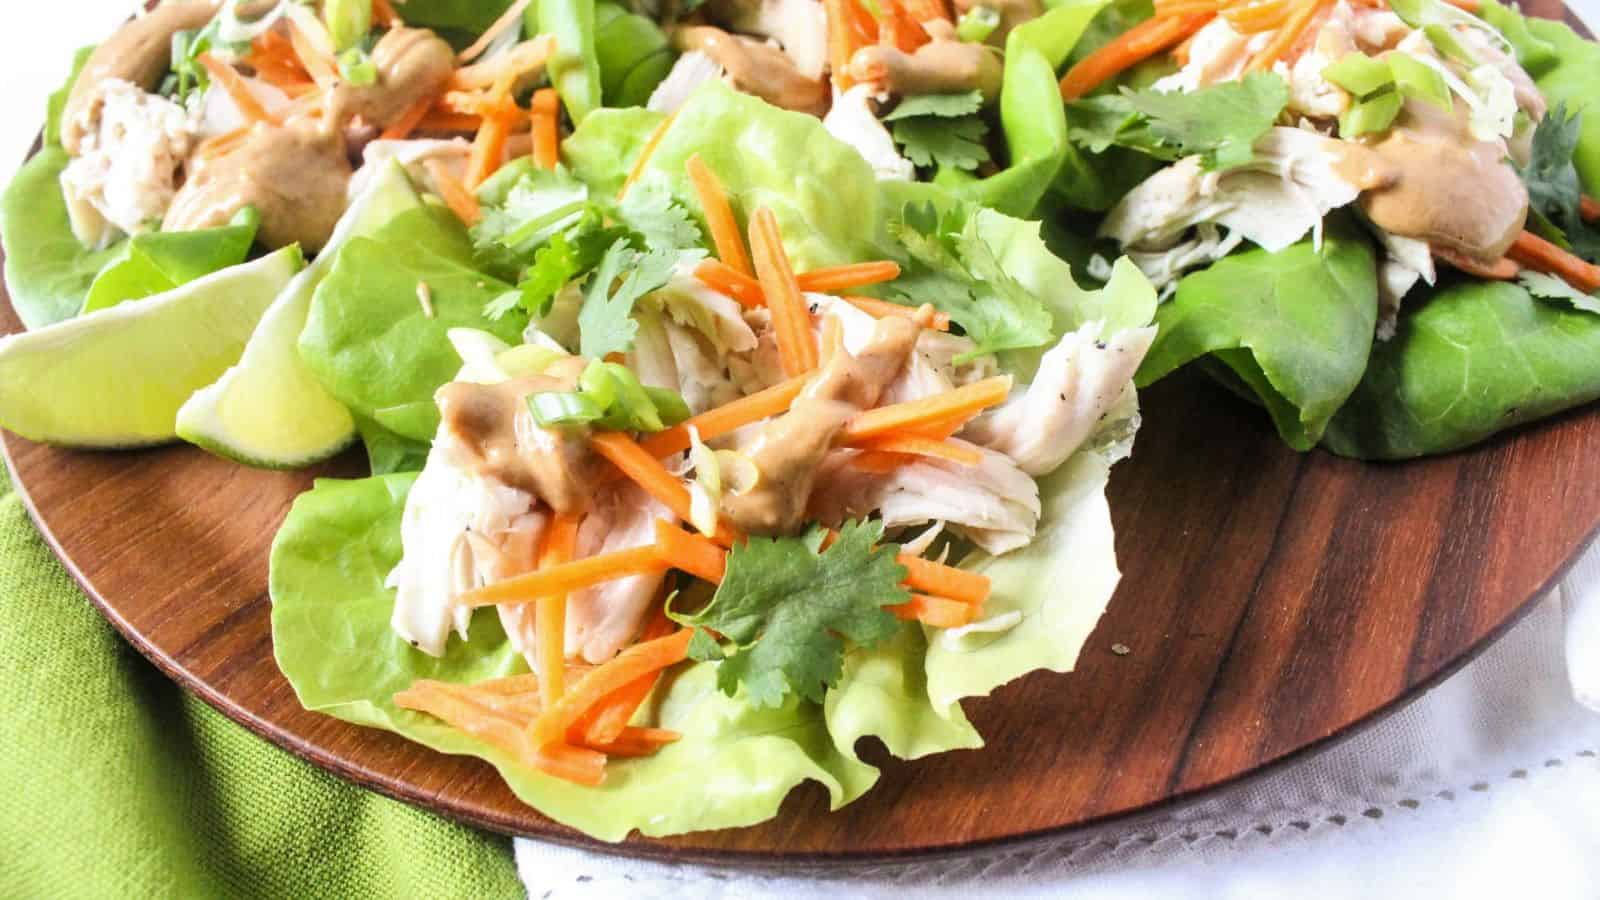 Lettuce wraps filled with shredded chicken, shredded carrots, and peanut sauce on a plate.